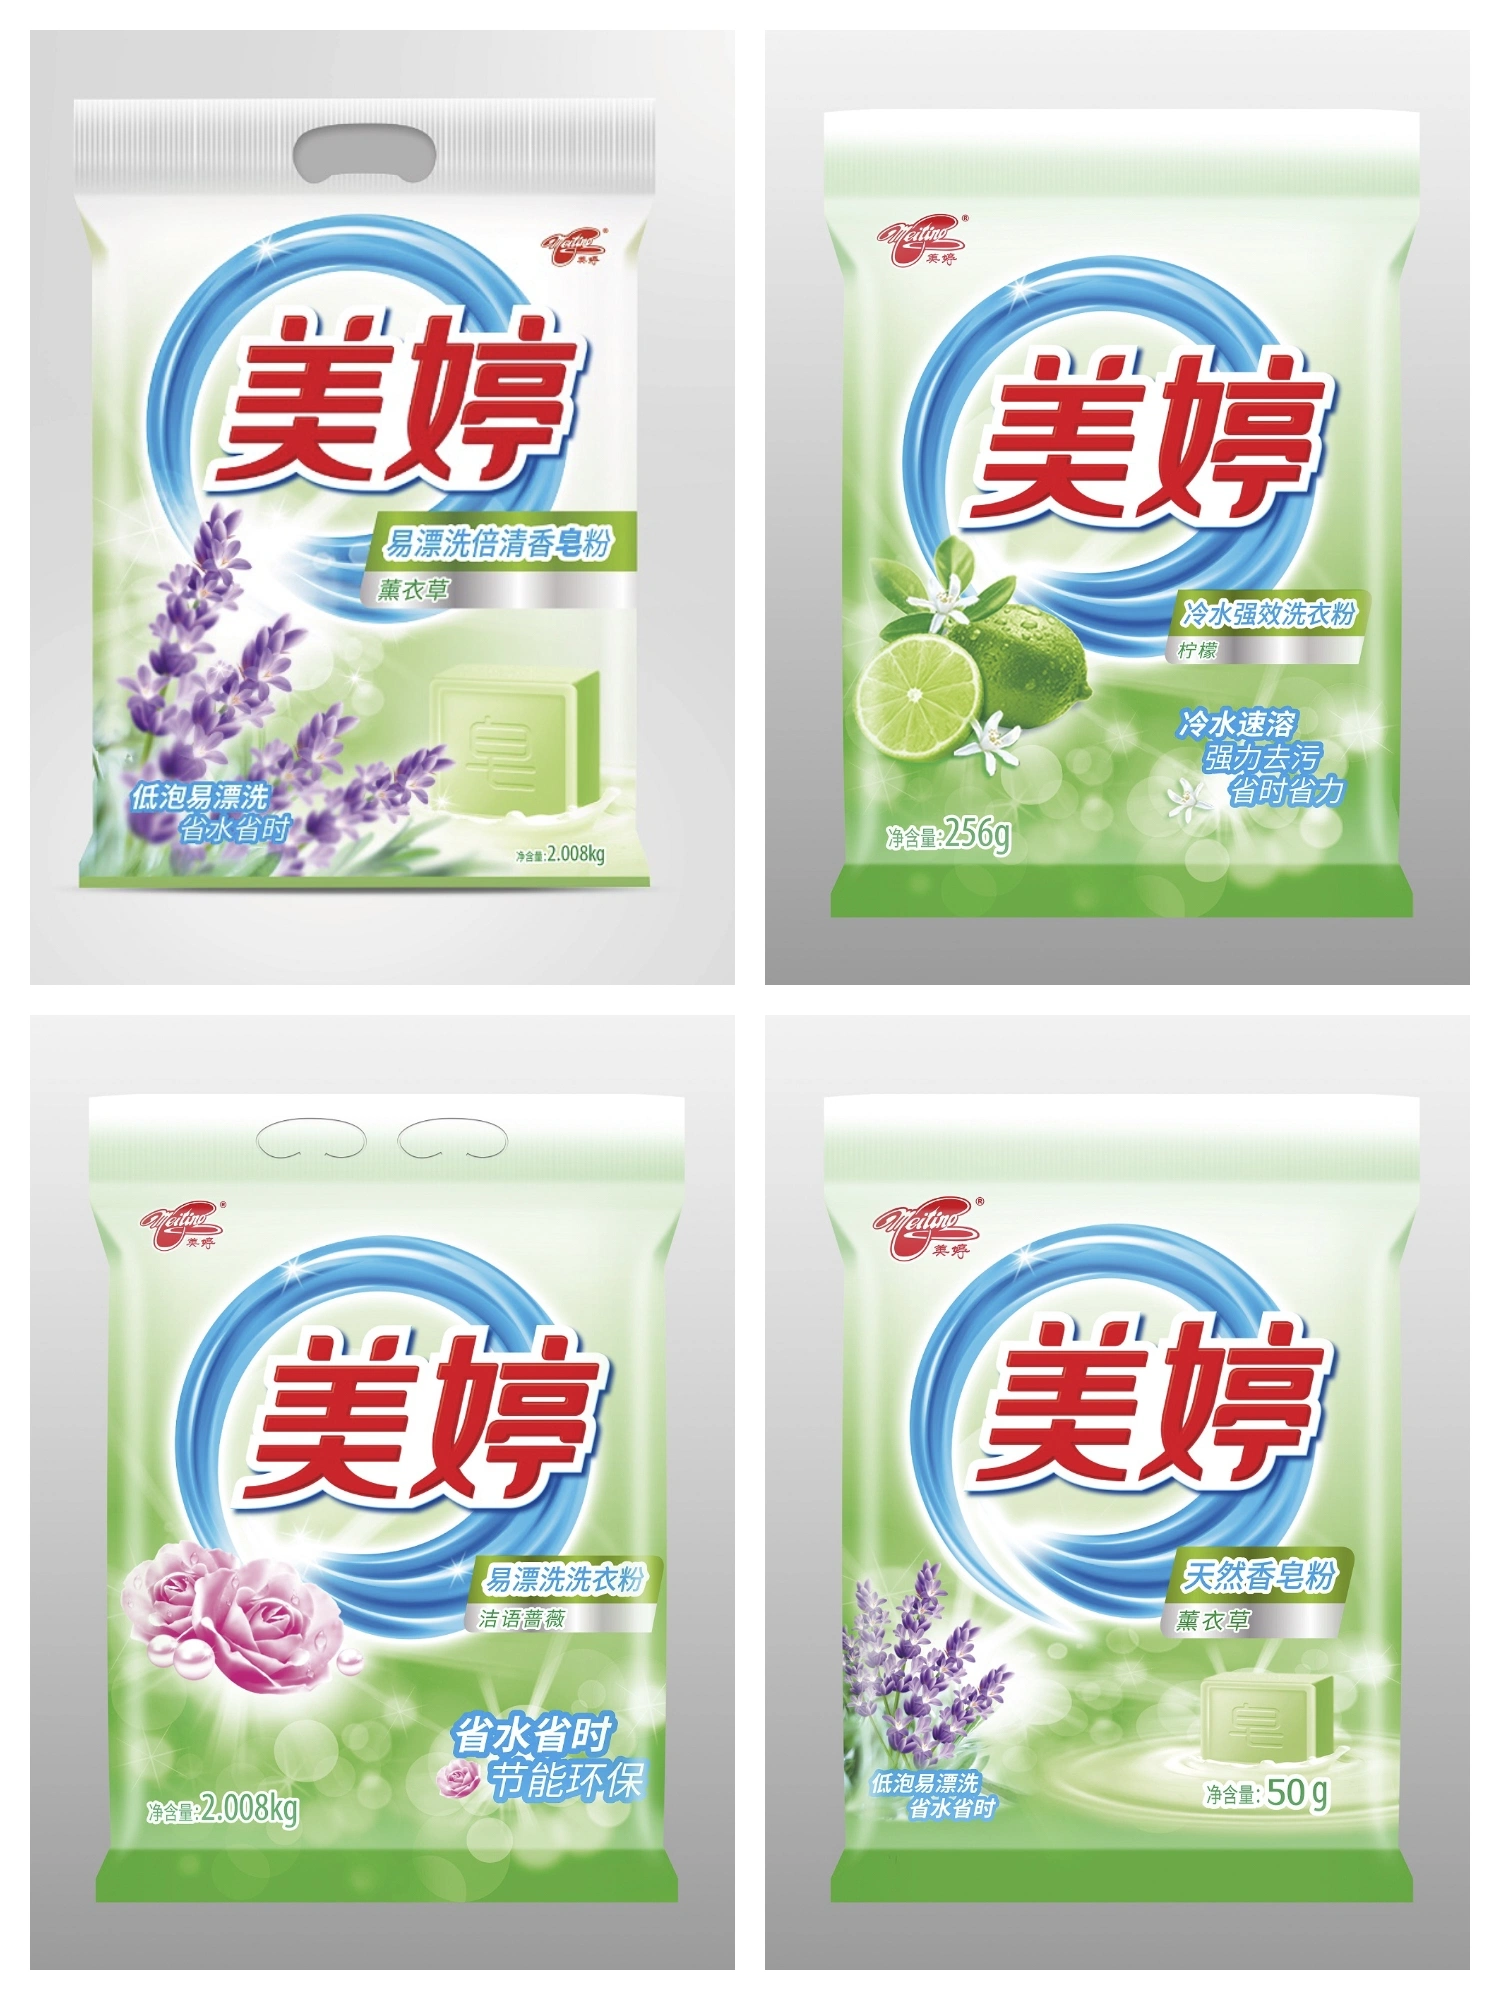 Household Cleaning Product Liquid Laundry Detergent Washing Powder Laundry Detergent Product